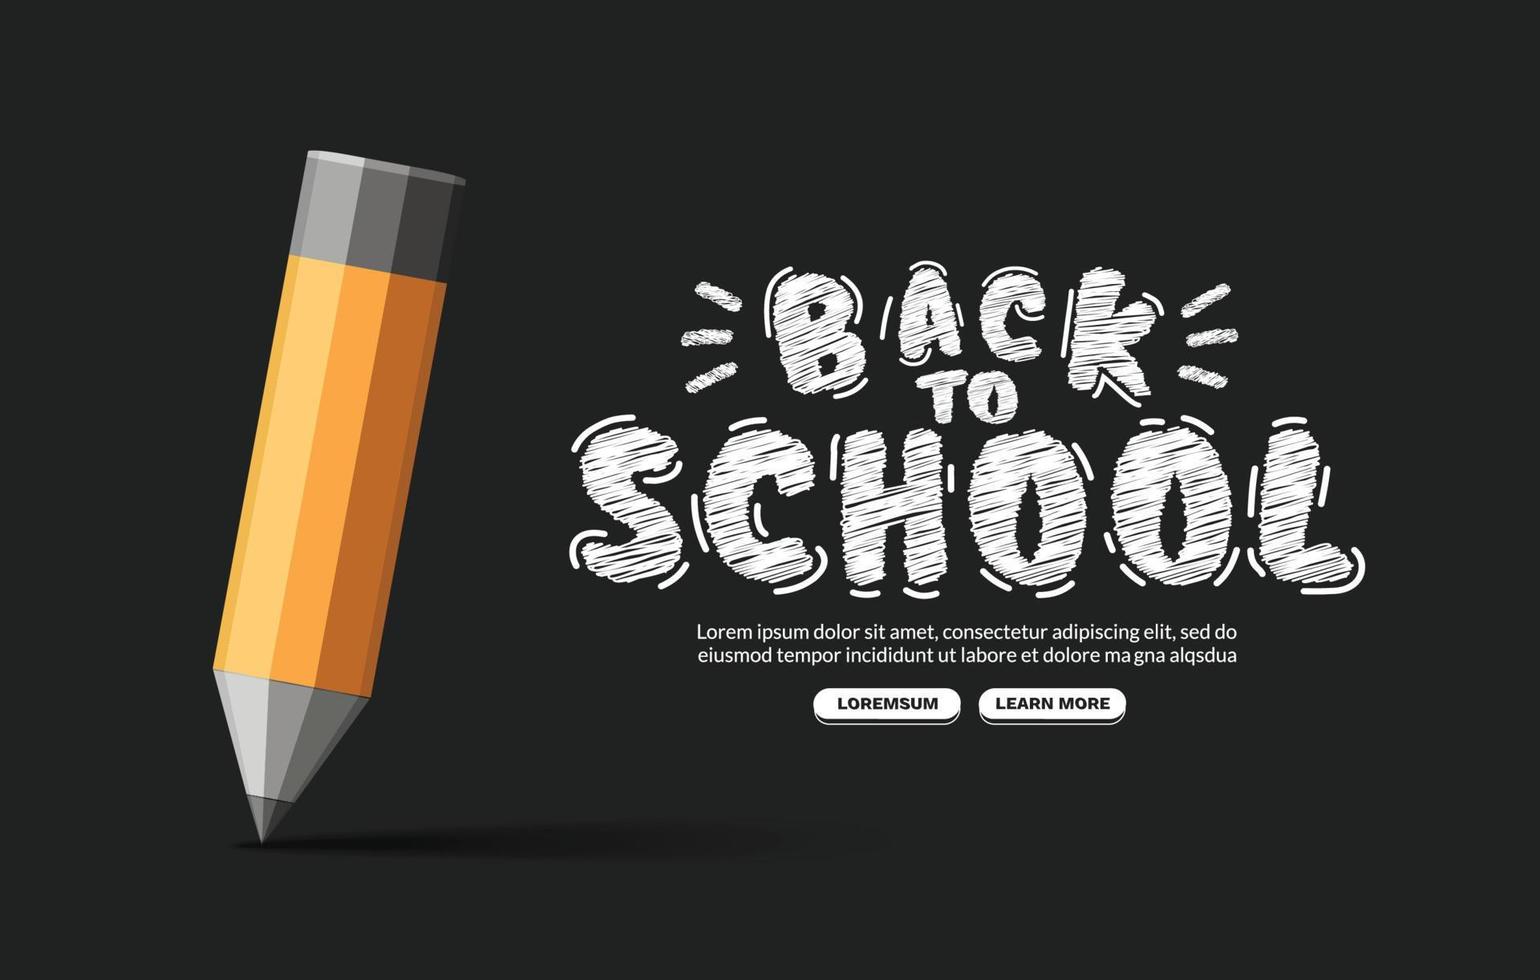 Welcome back to school background with pencil drawing, Concept of education templates for invitation, banner and poster vector